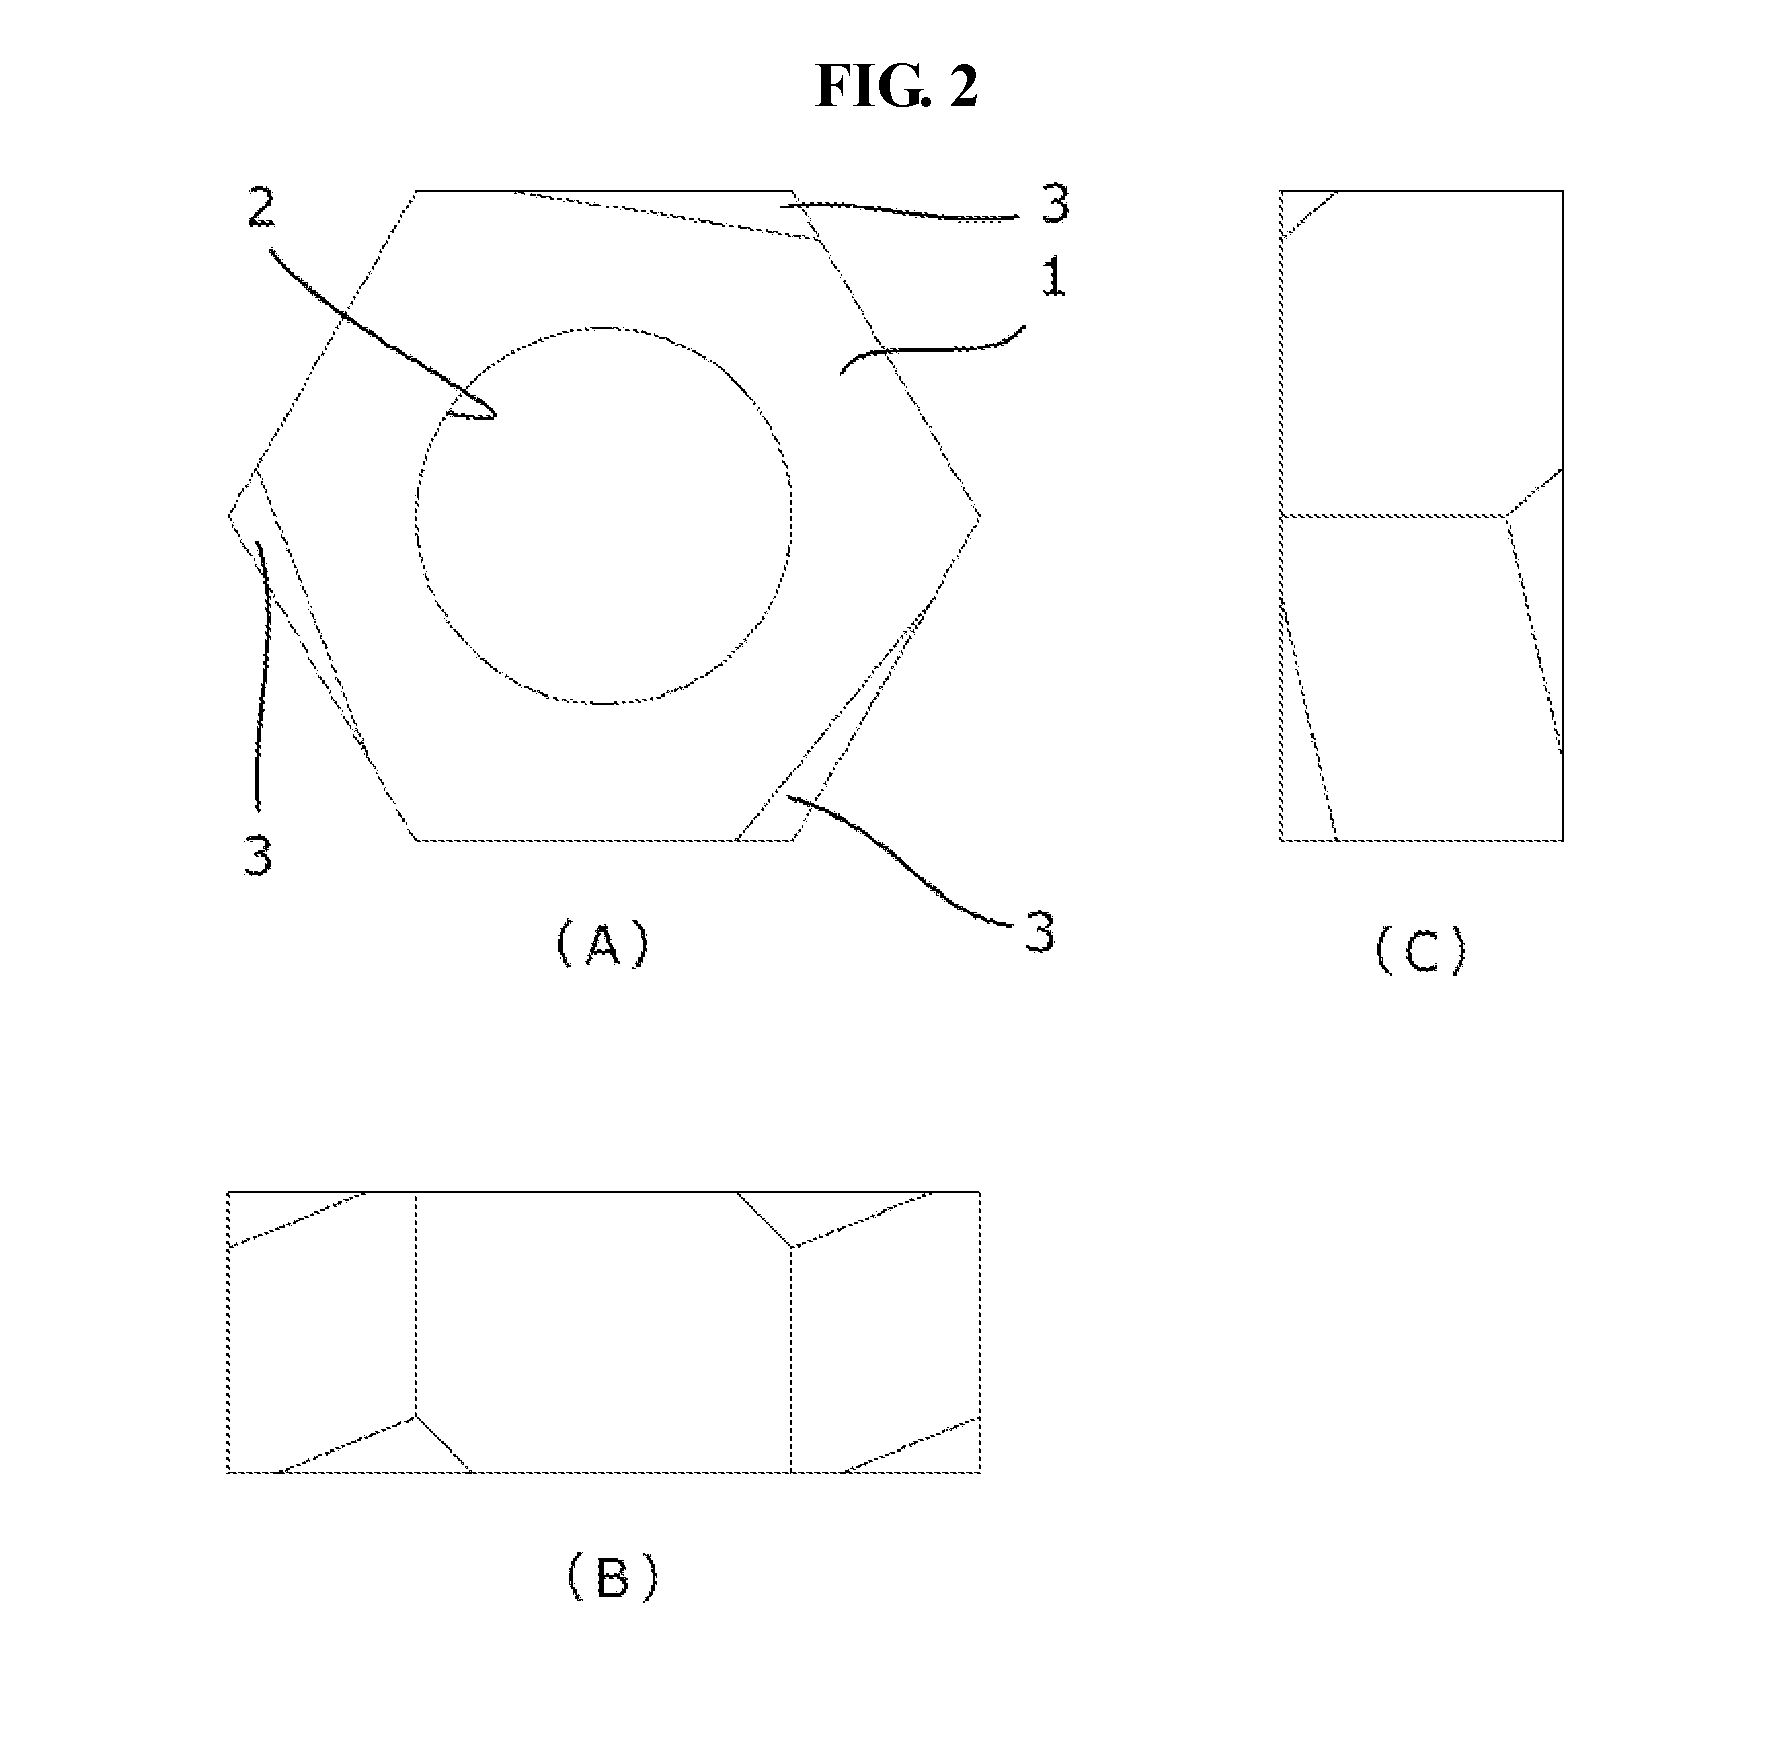 Form-rolling die structure and form-rolling method for compound screw